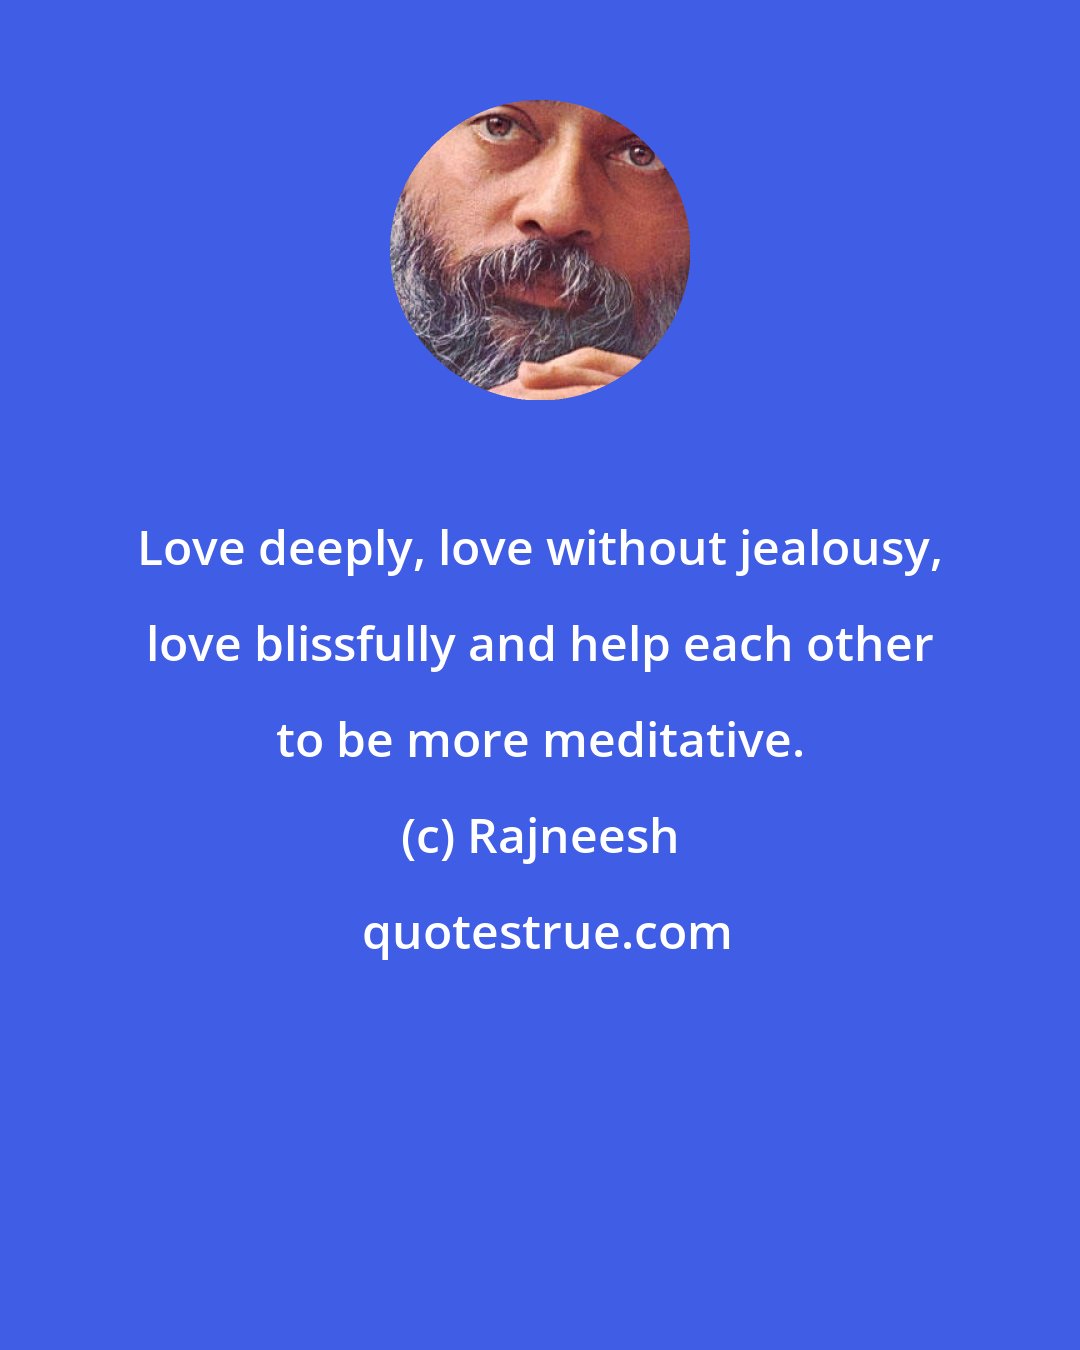 Rajneesh: Love deeply, love without jealousy, love blissfully and help each other to be more meditative.